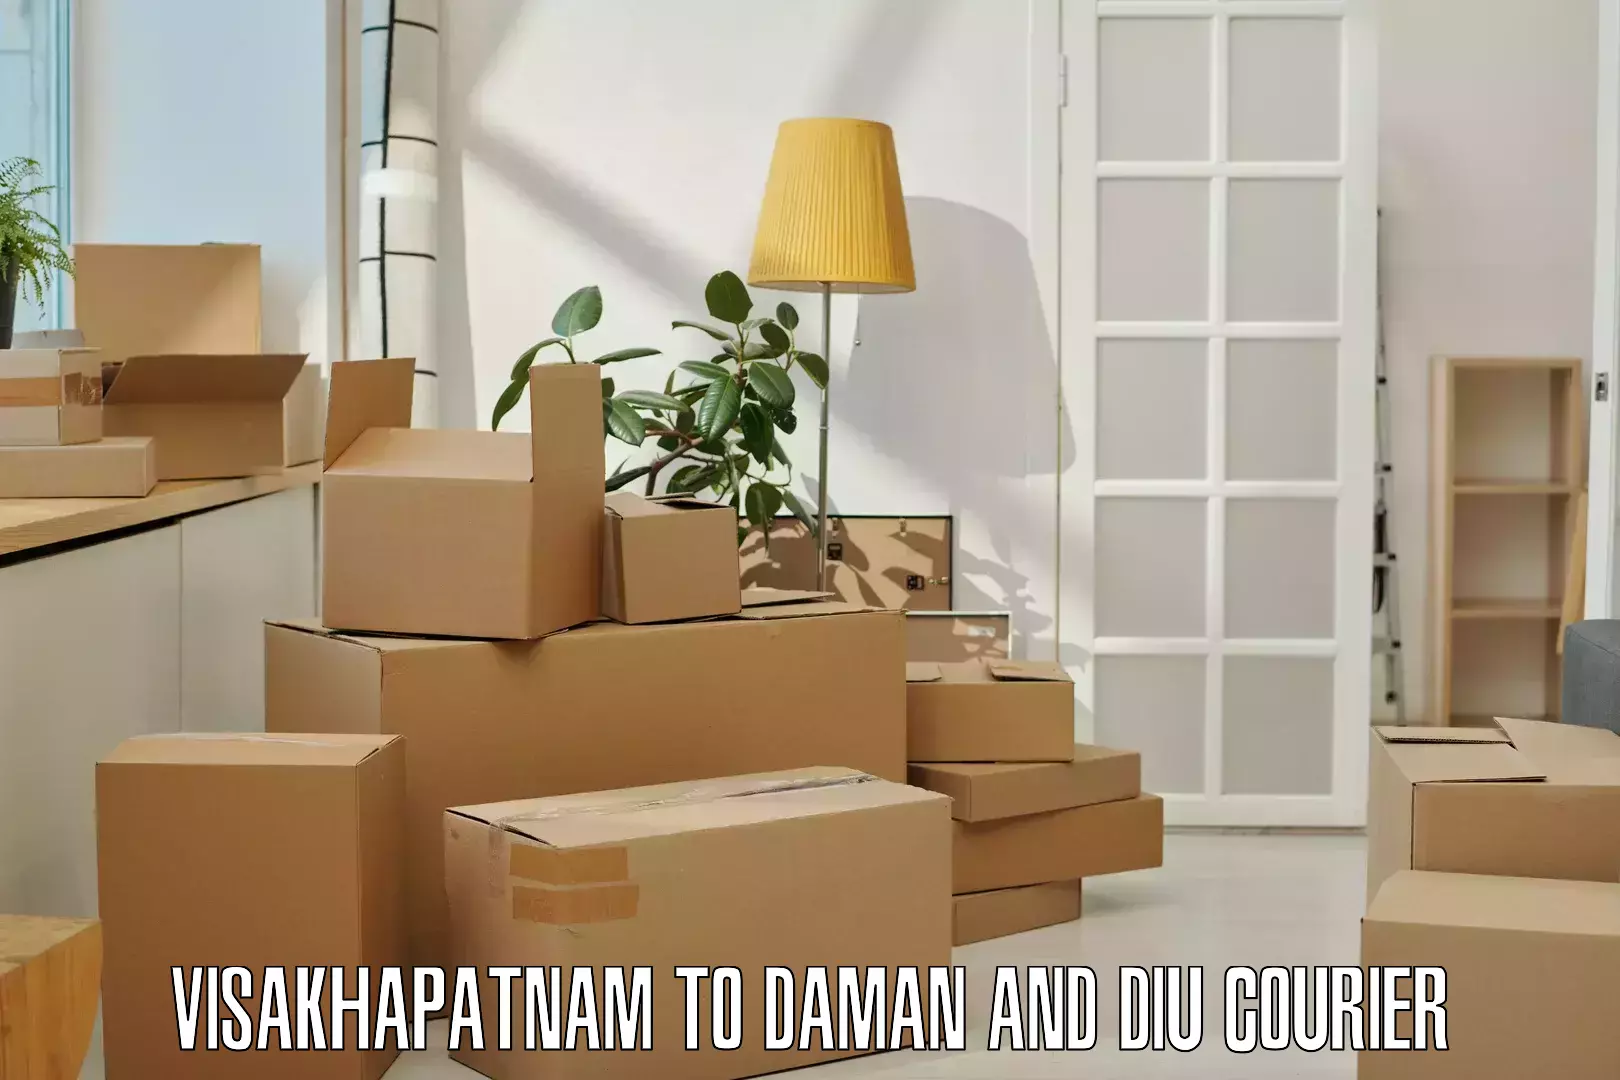 Package delivery network Visakhapatnam to Diu